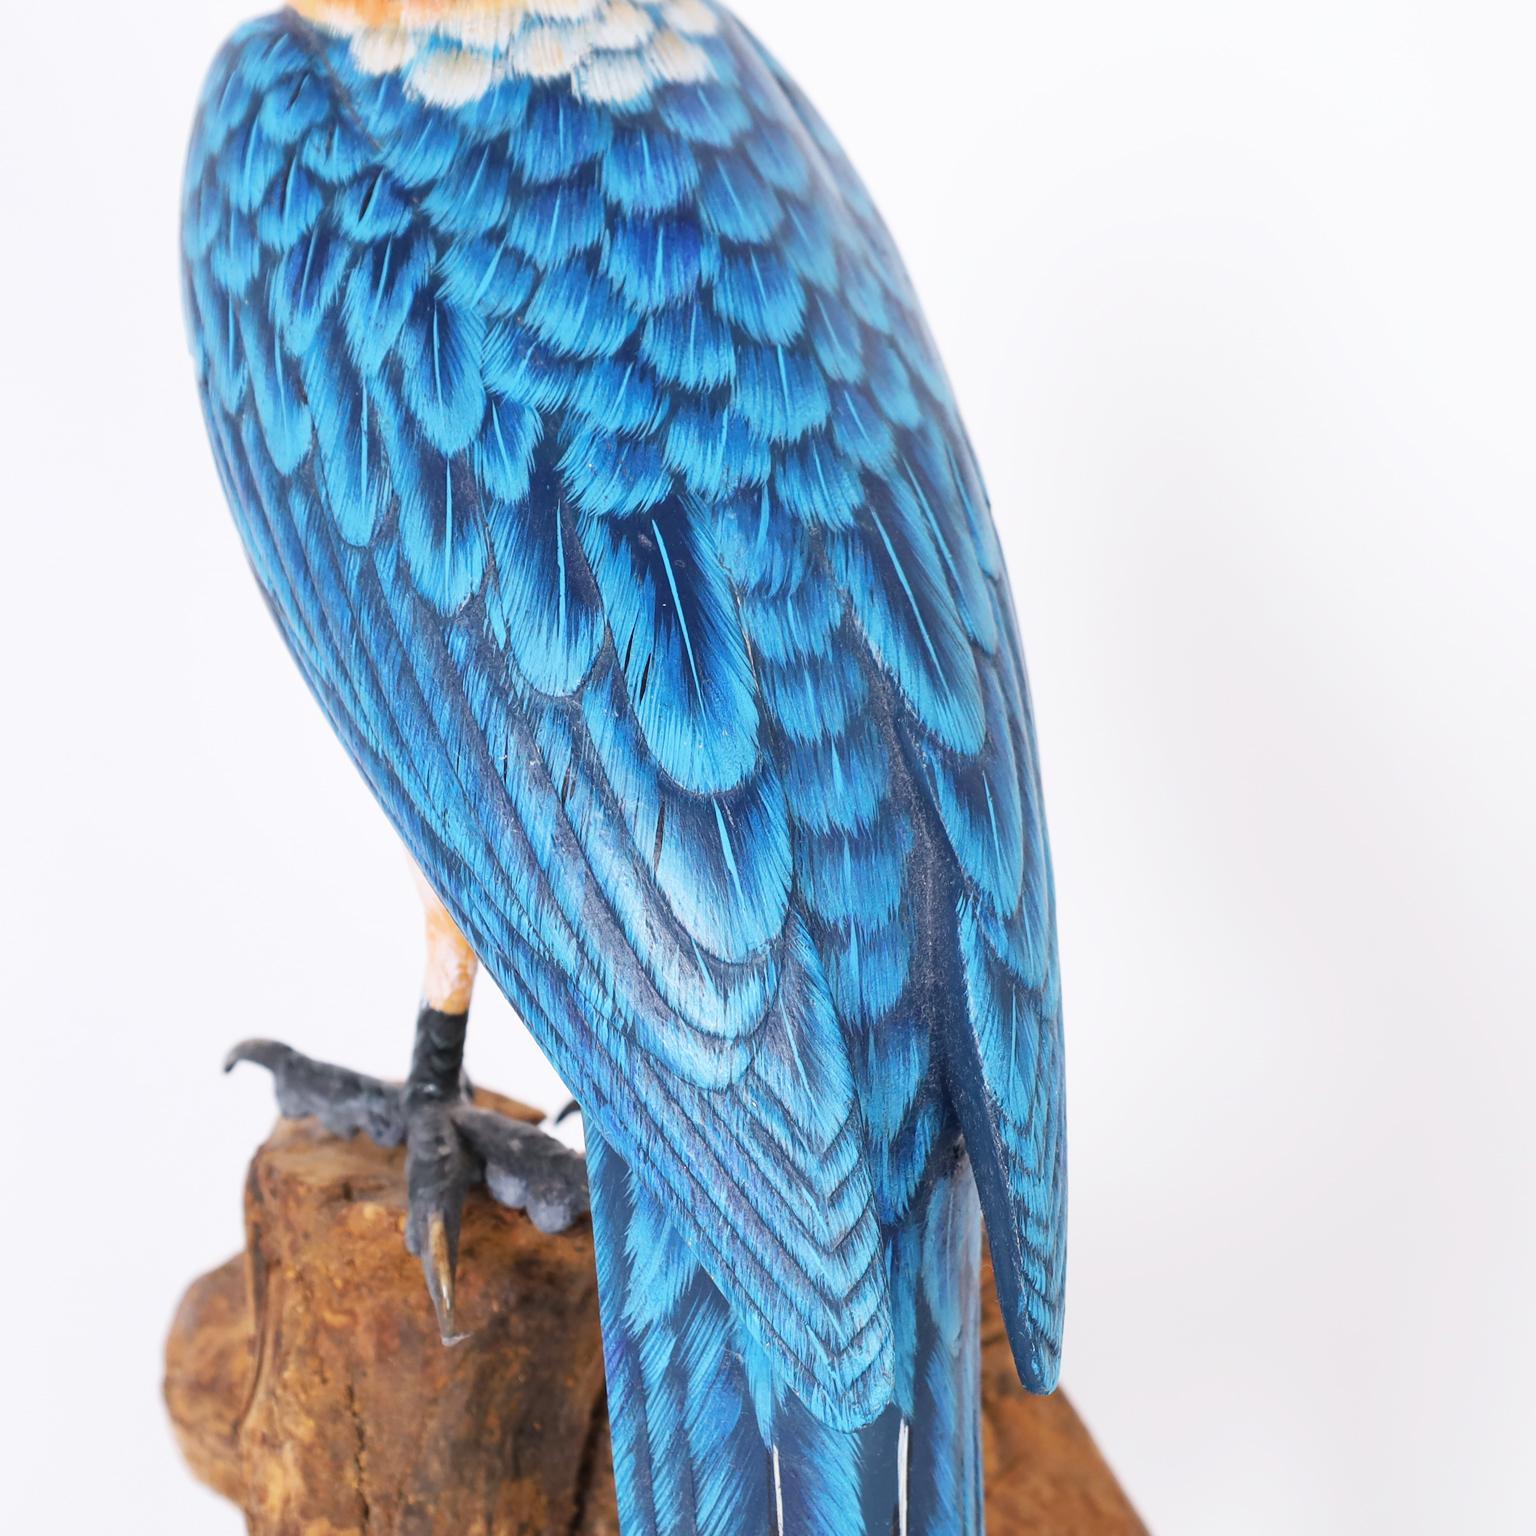 American Carved and Painted Wood Parrot Sculpture For Sale